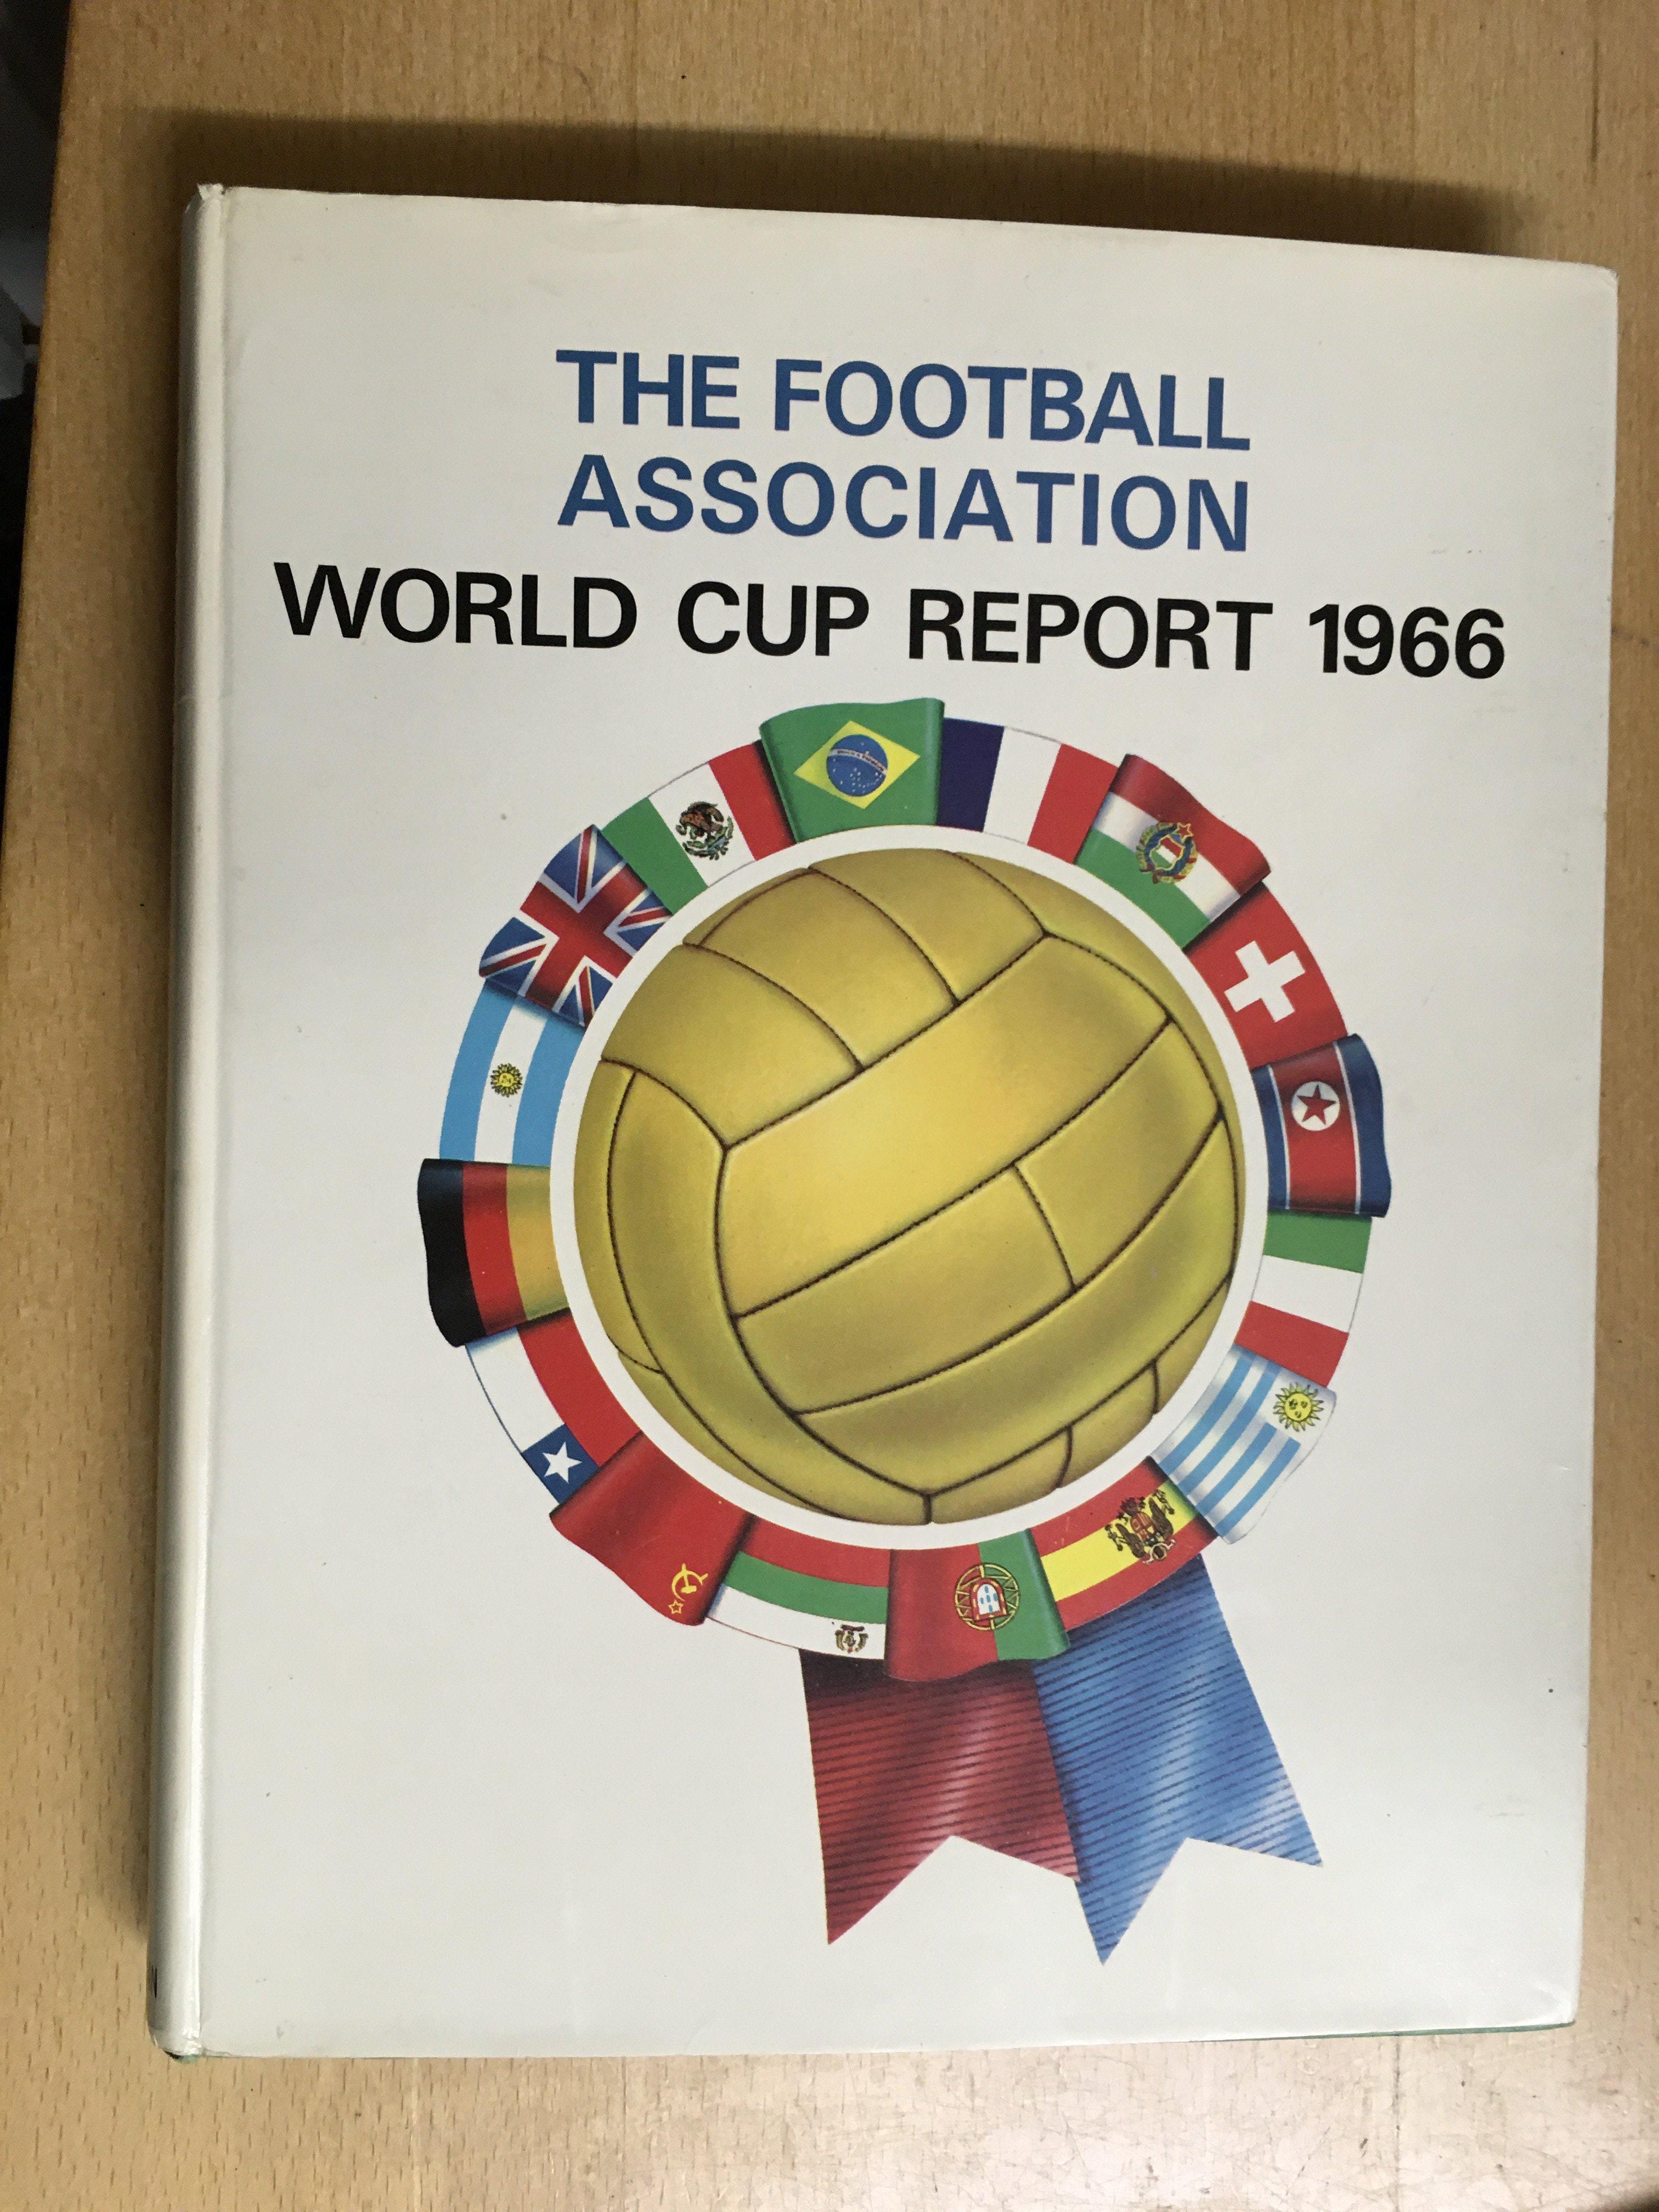 1966 World Cup Report Football Book: Harder to obtain book by Heinemann produced for the Football